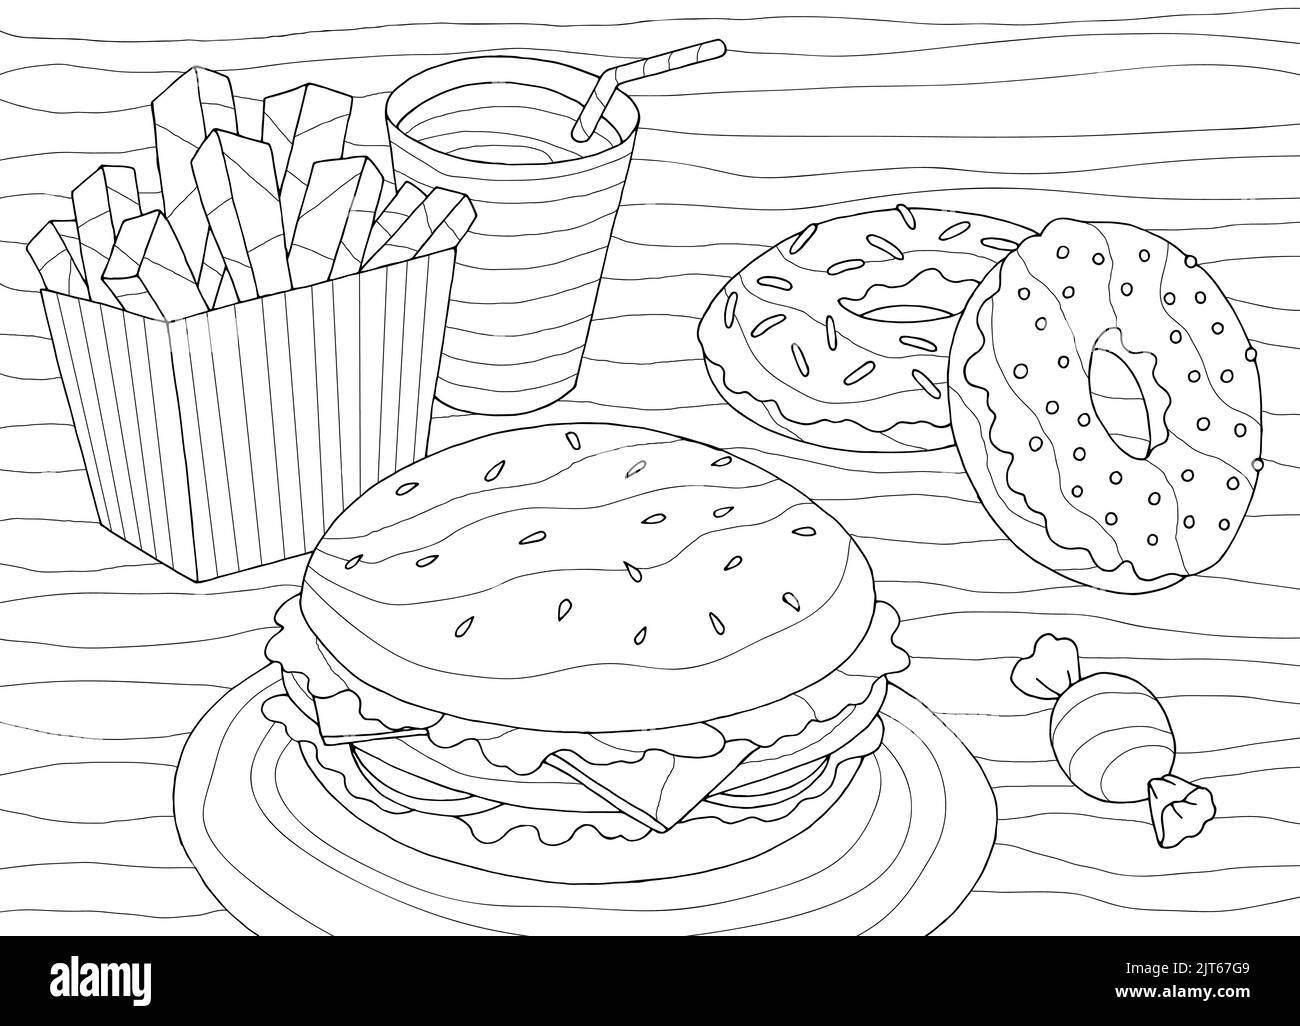 Fast food coloring graphic black white sketch illustration vector Stock Vector